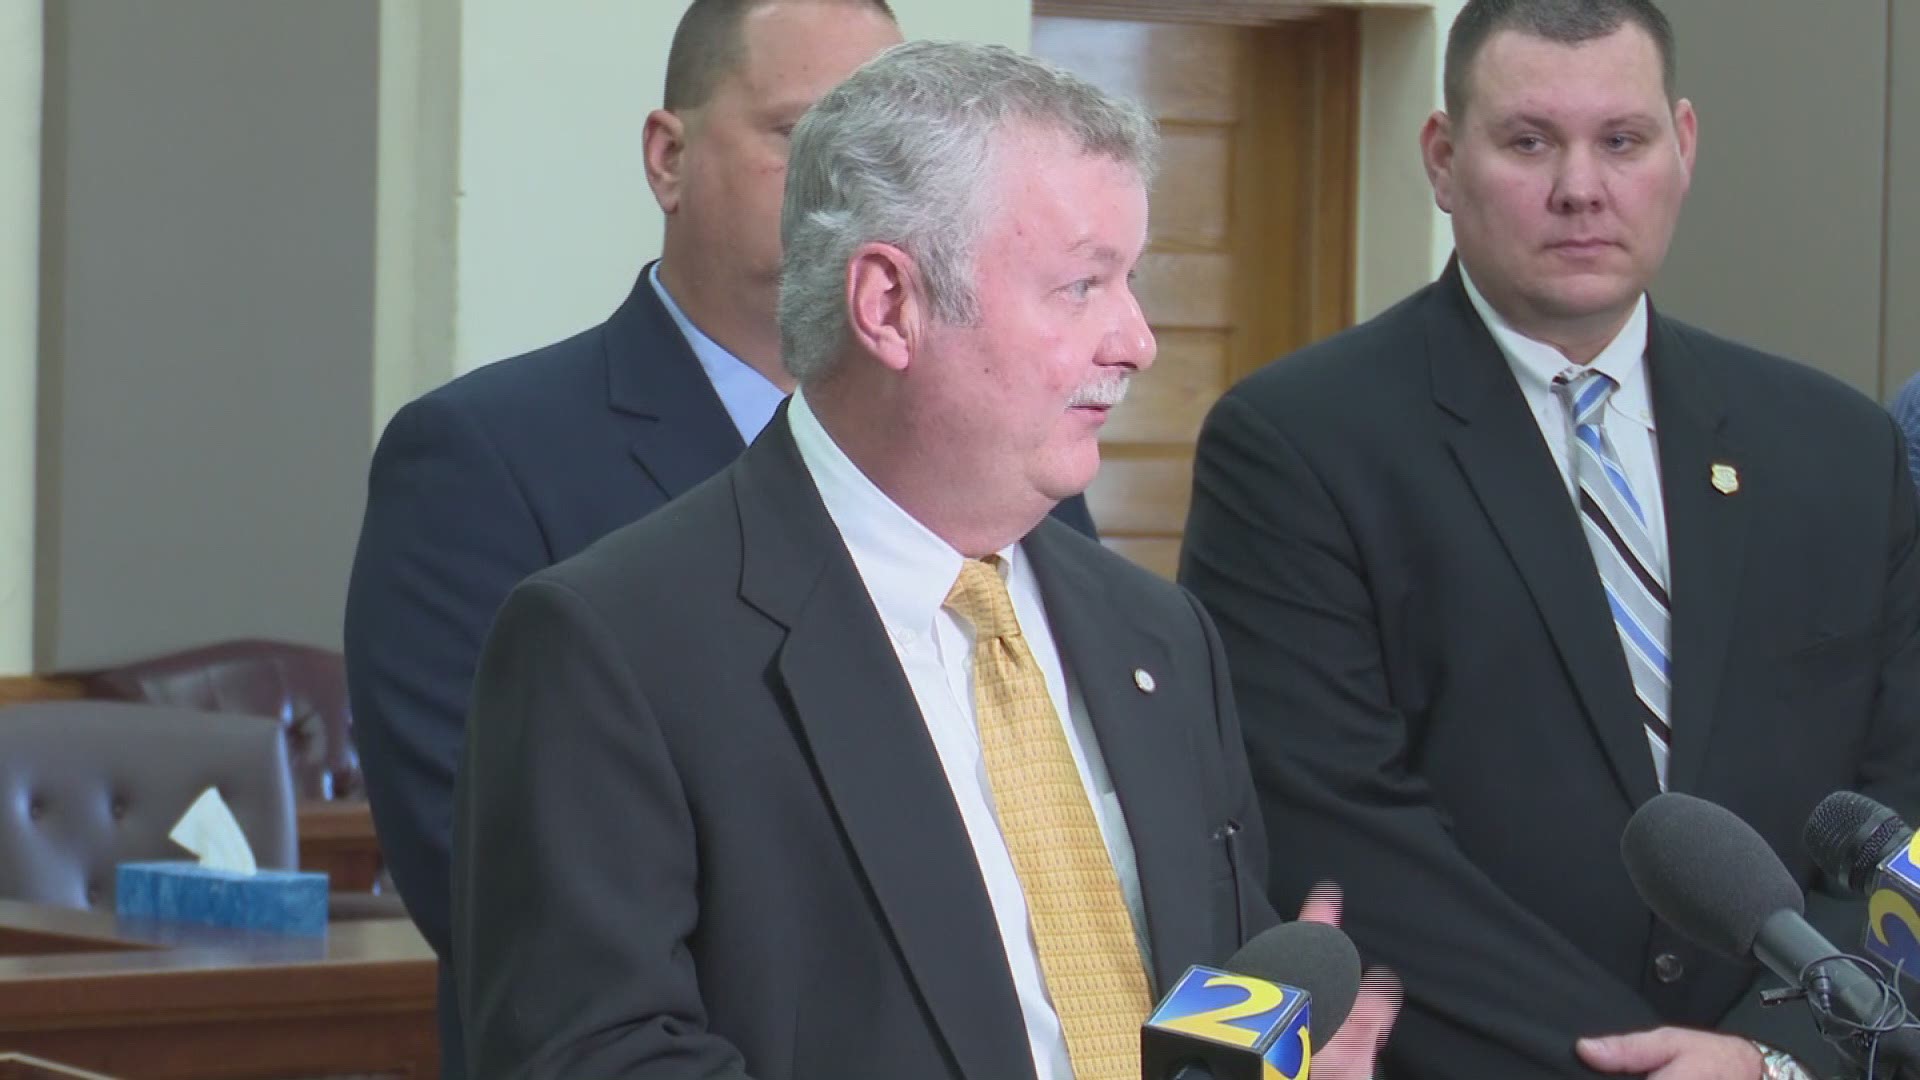 GBI holds news conference on Tara Grinstead case